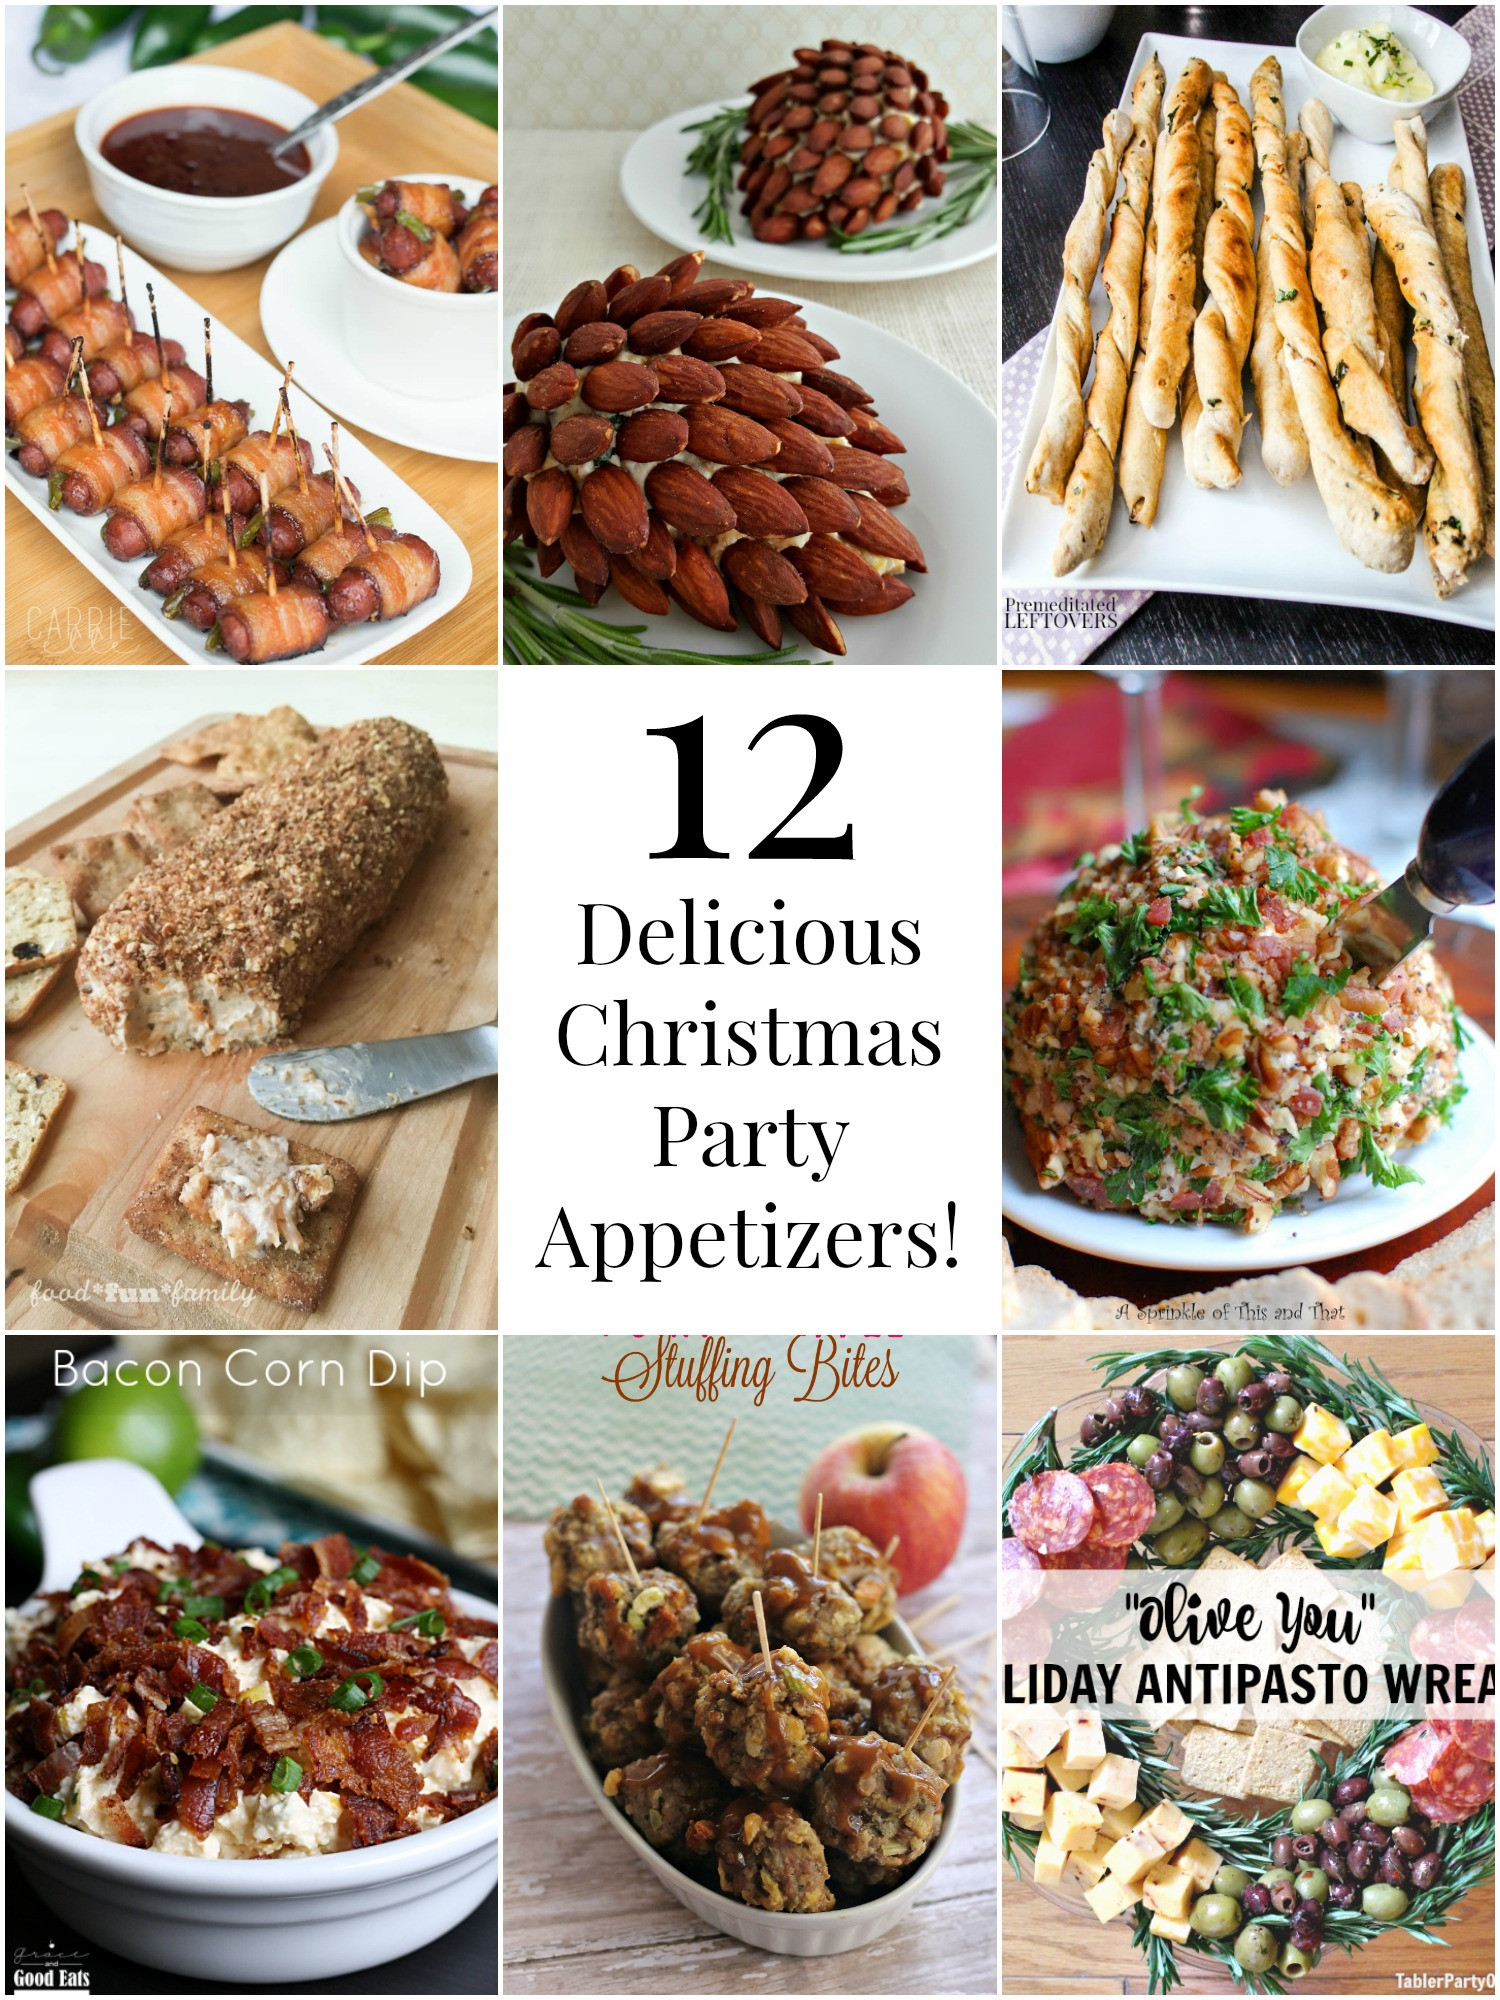 Christmas Party Appetizers Pinterest
 So Creative 12 Delicious Christmas Party Appetizers